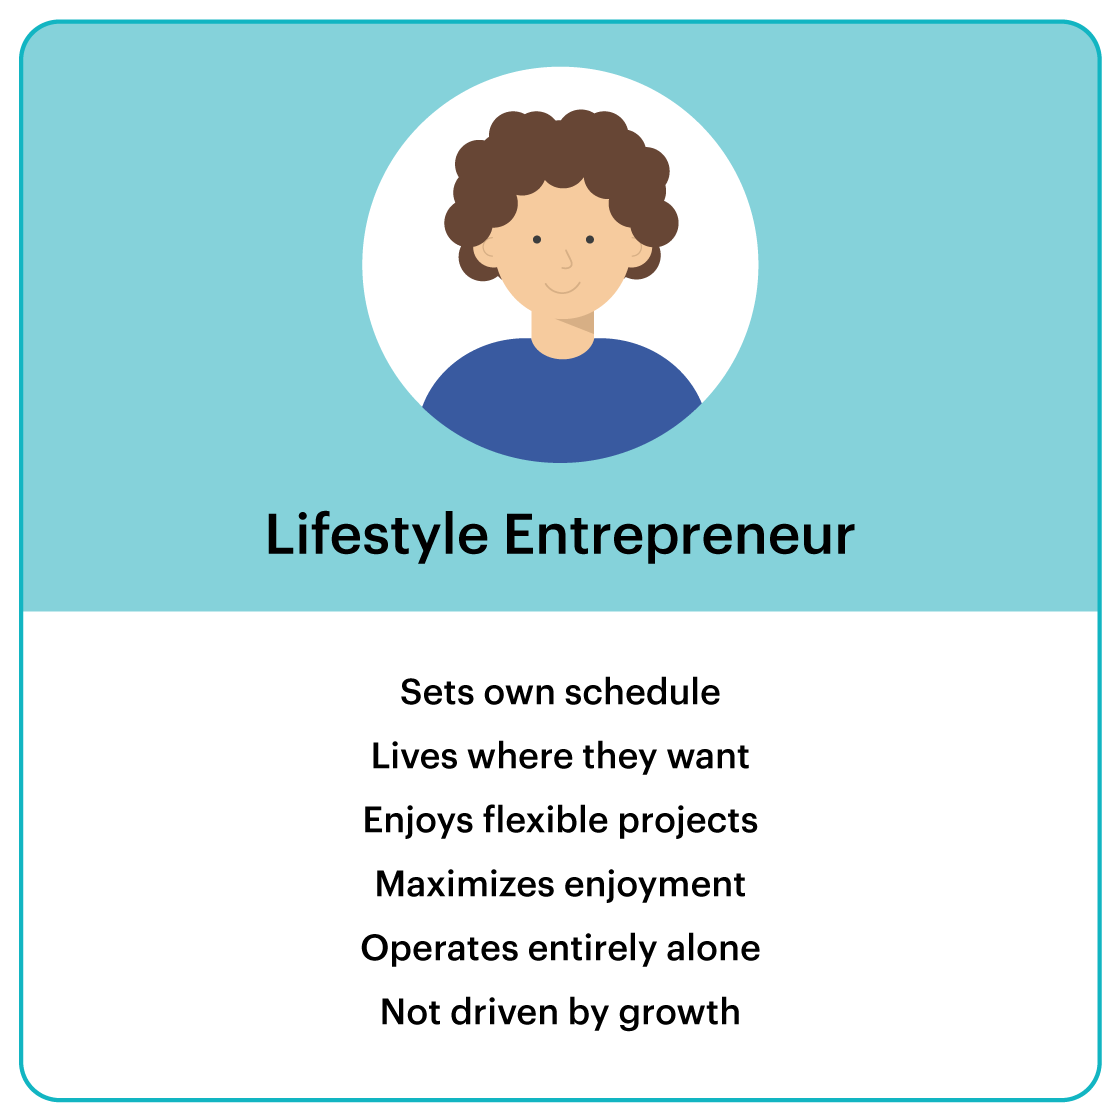 Infographic depicting an illustration of a lifestyle entrepreneur and 6 common characteristics